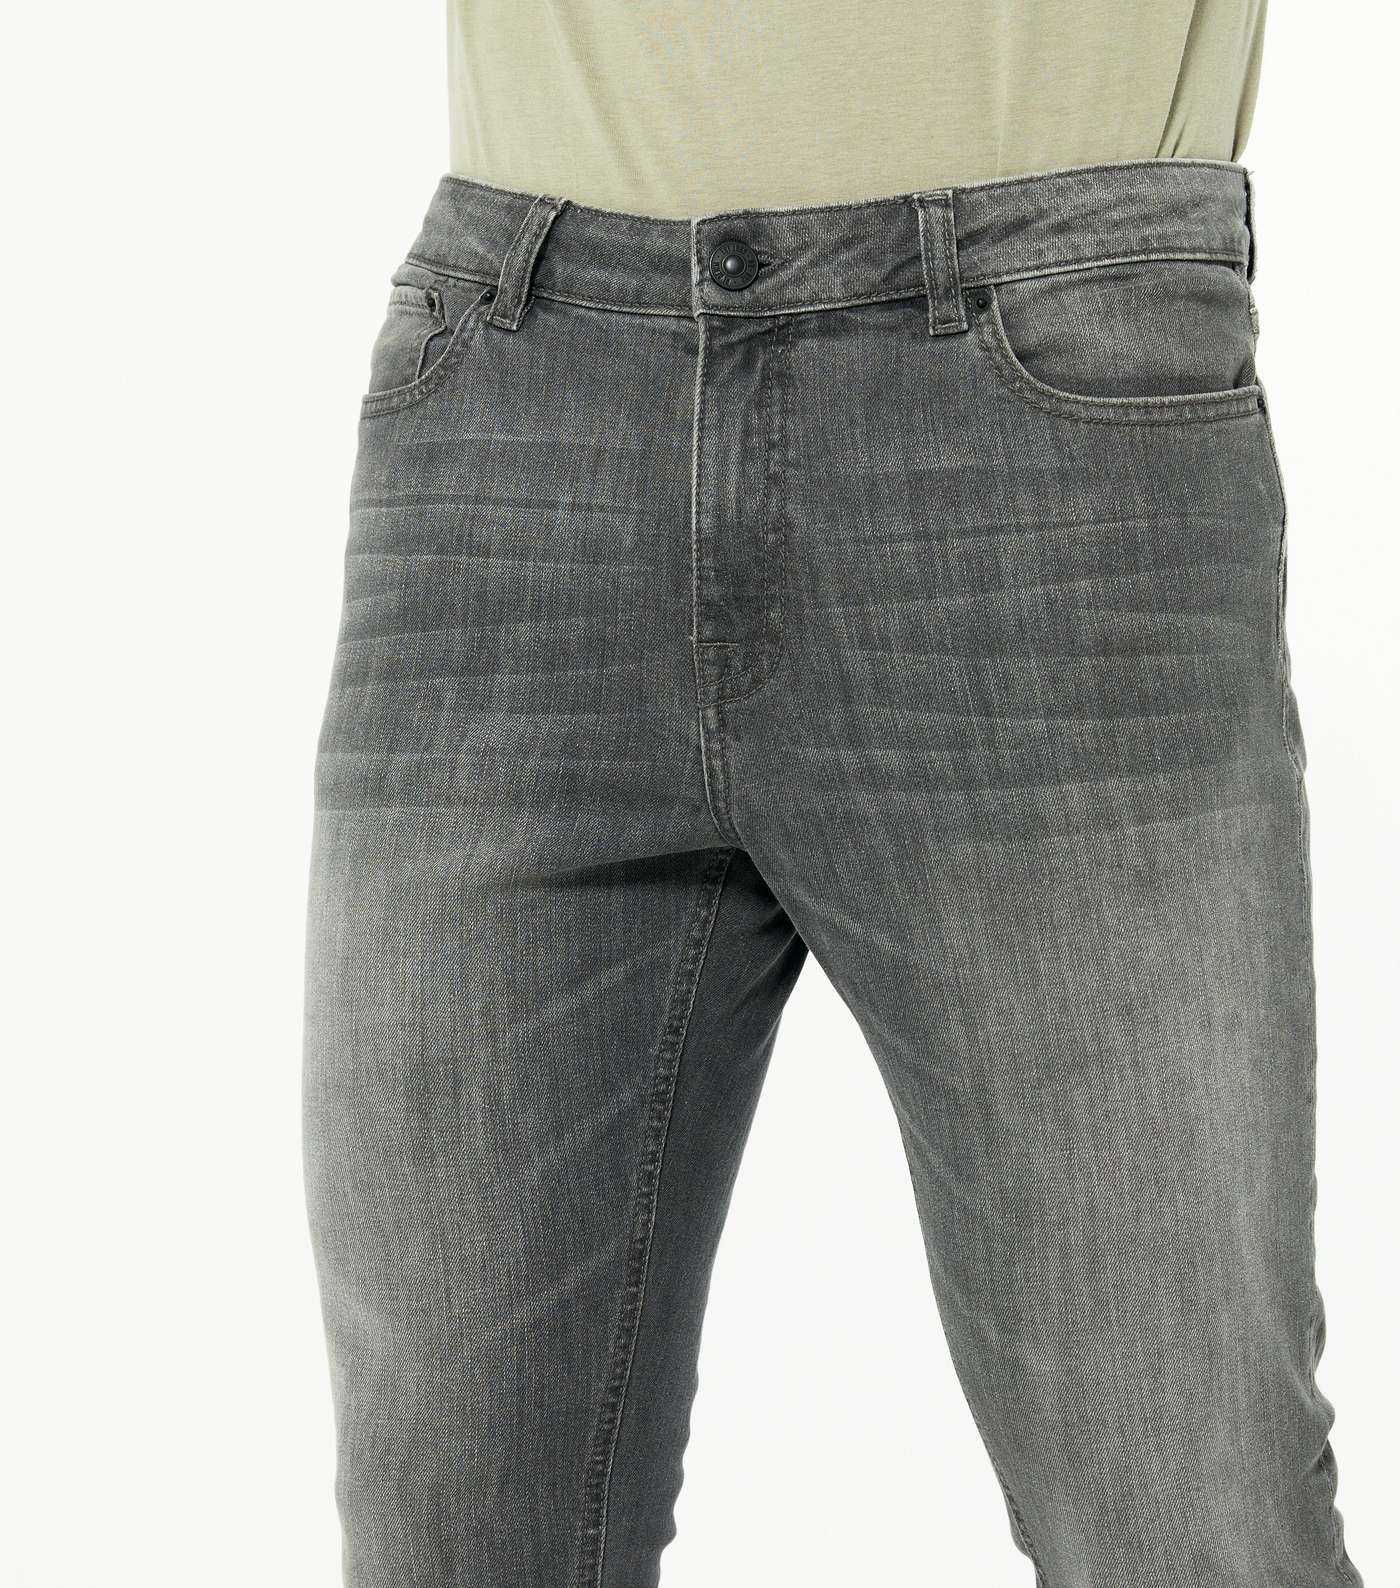 Pale Grey Washed Skinny Stretch Jeans Image 3